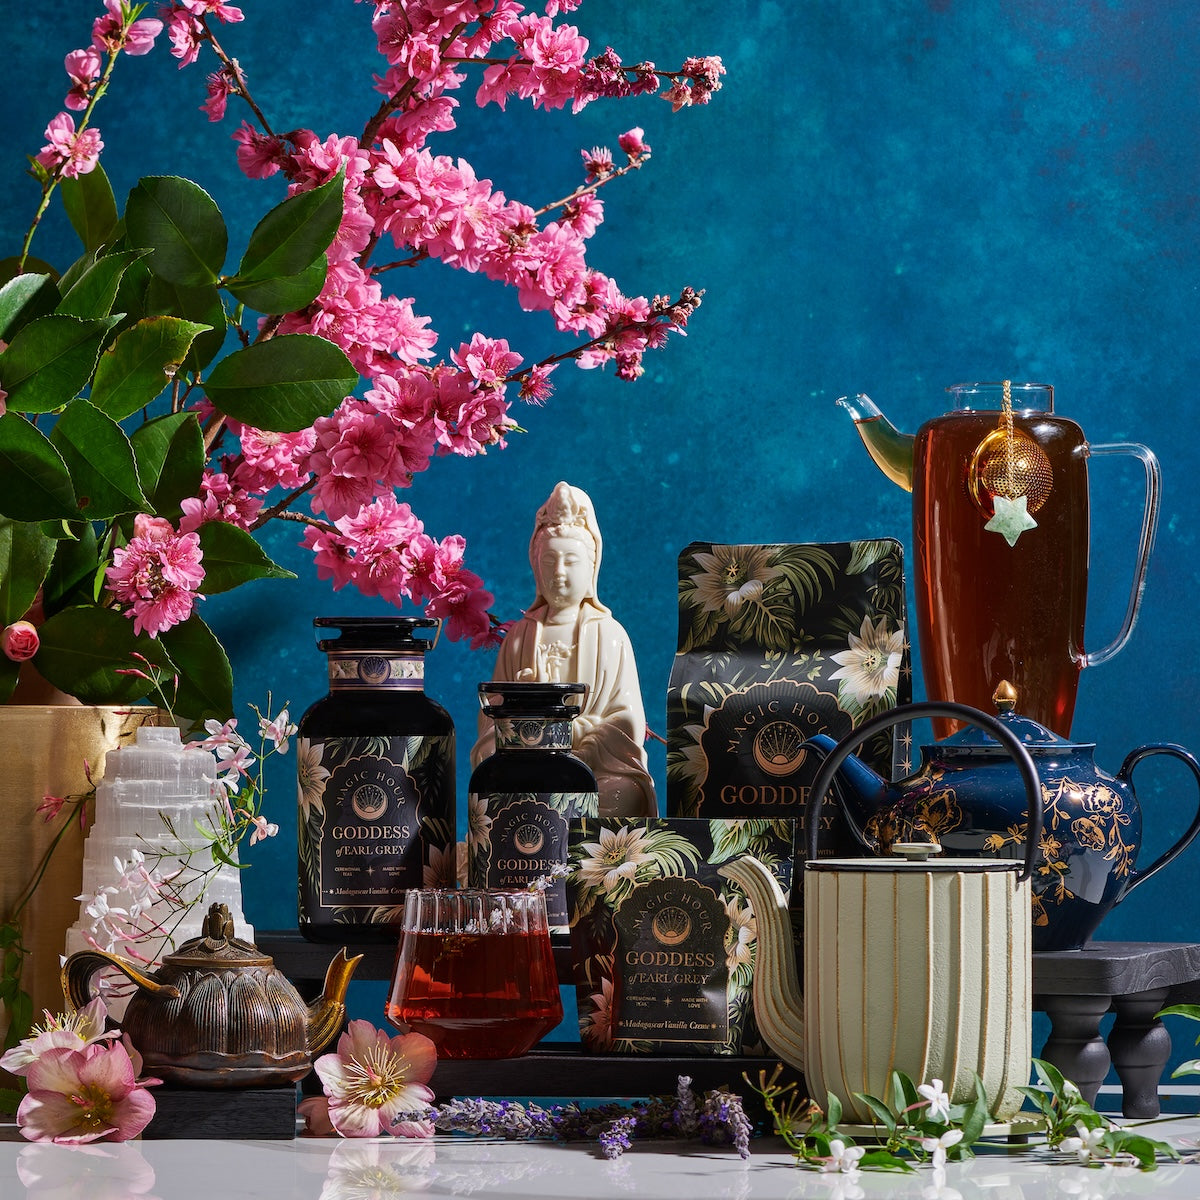 A colorful arrangement featuring a variety of organic tea products displayed on a table. The scene includes teapots, tea canisters, packets of Magic Hour&#39;s Goddess of Earl: Madagascar Vanilla Creme Tea for Soothing Delight &amp; Delicious Decadence, a glass of tea, and a glass pitcher of iced tea with a star-shaped tea infuser. Pink cherry blossoms and a Buddha statue adorn the background.